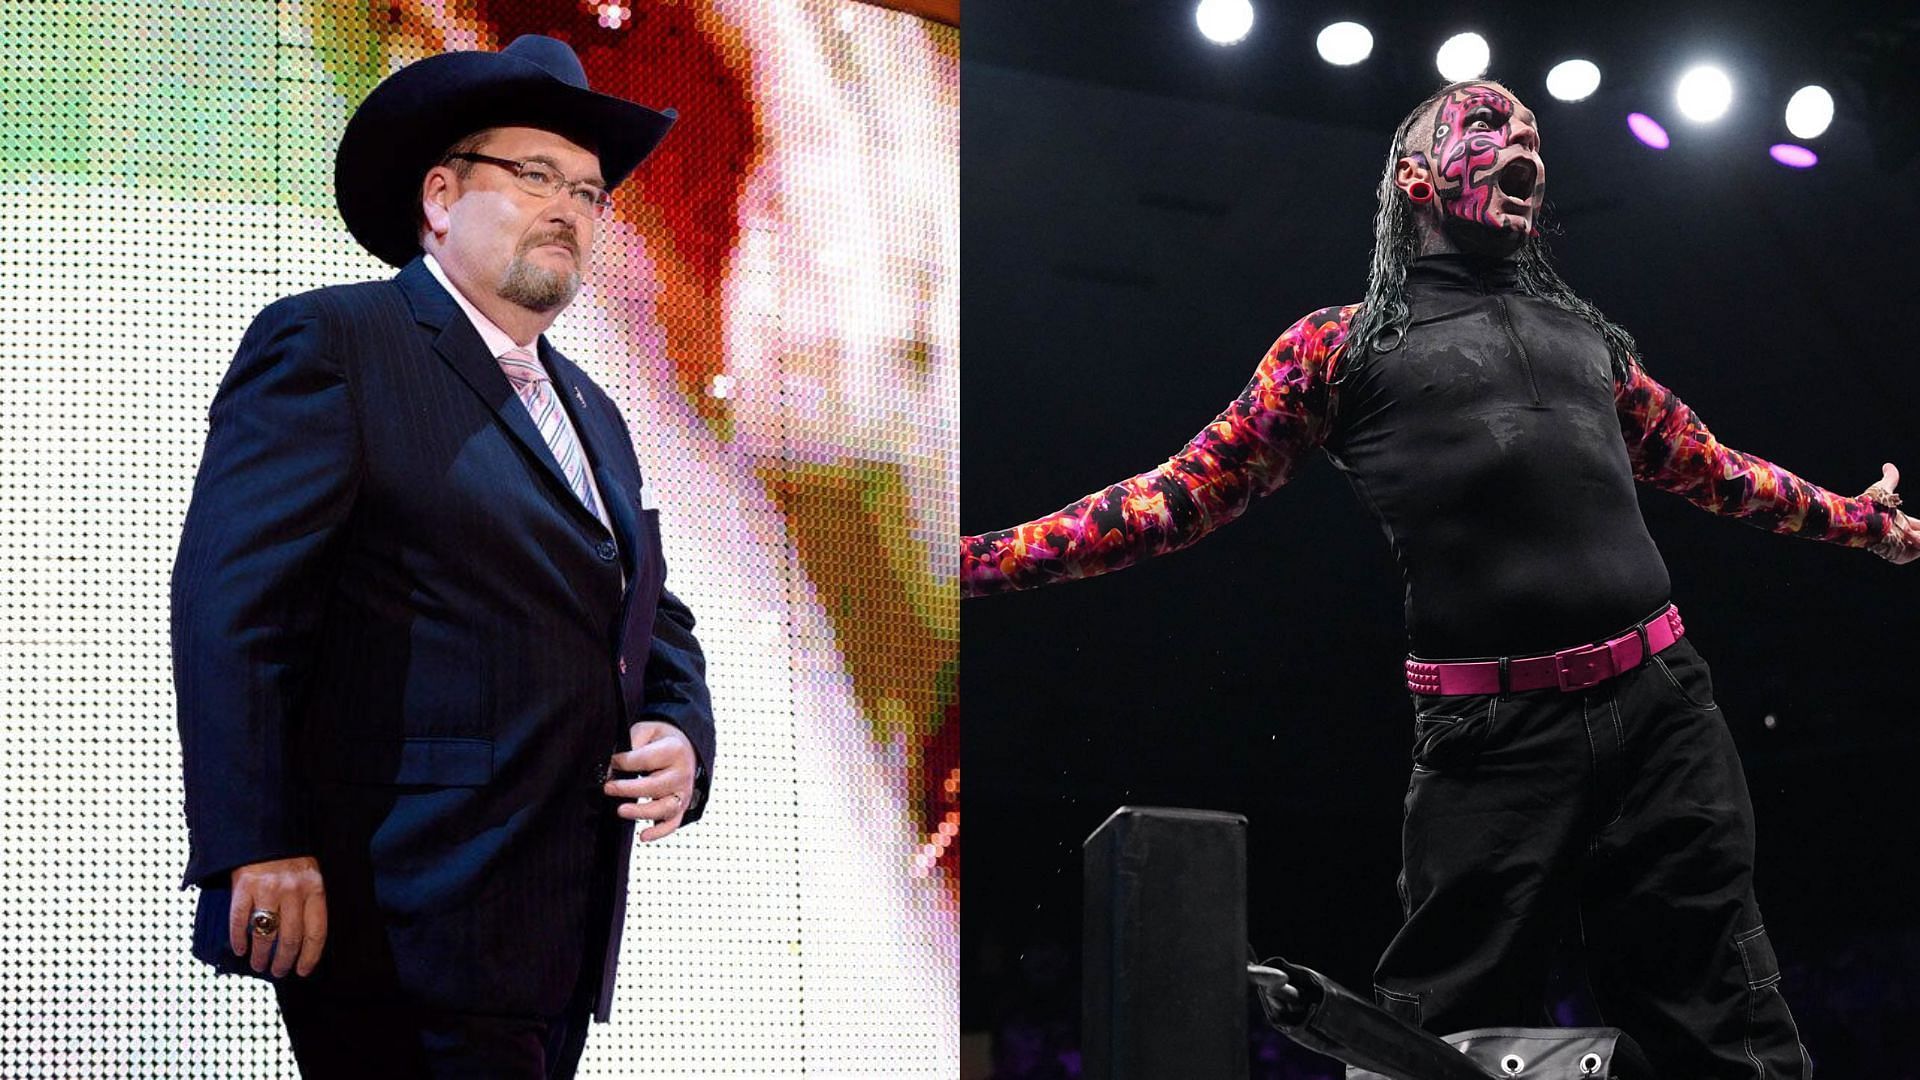 Jim Ross and Jeff Hardy are both WWE icons [Photos courtesy of AEW and WWE